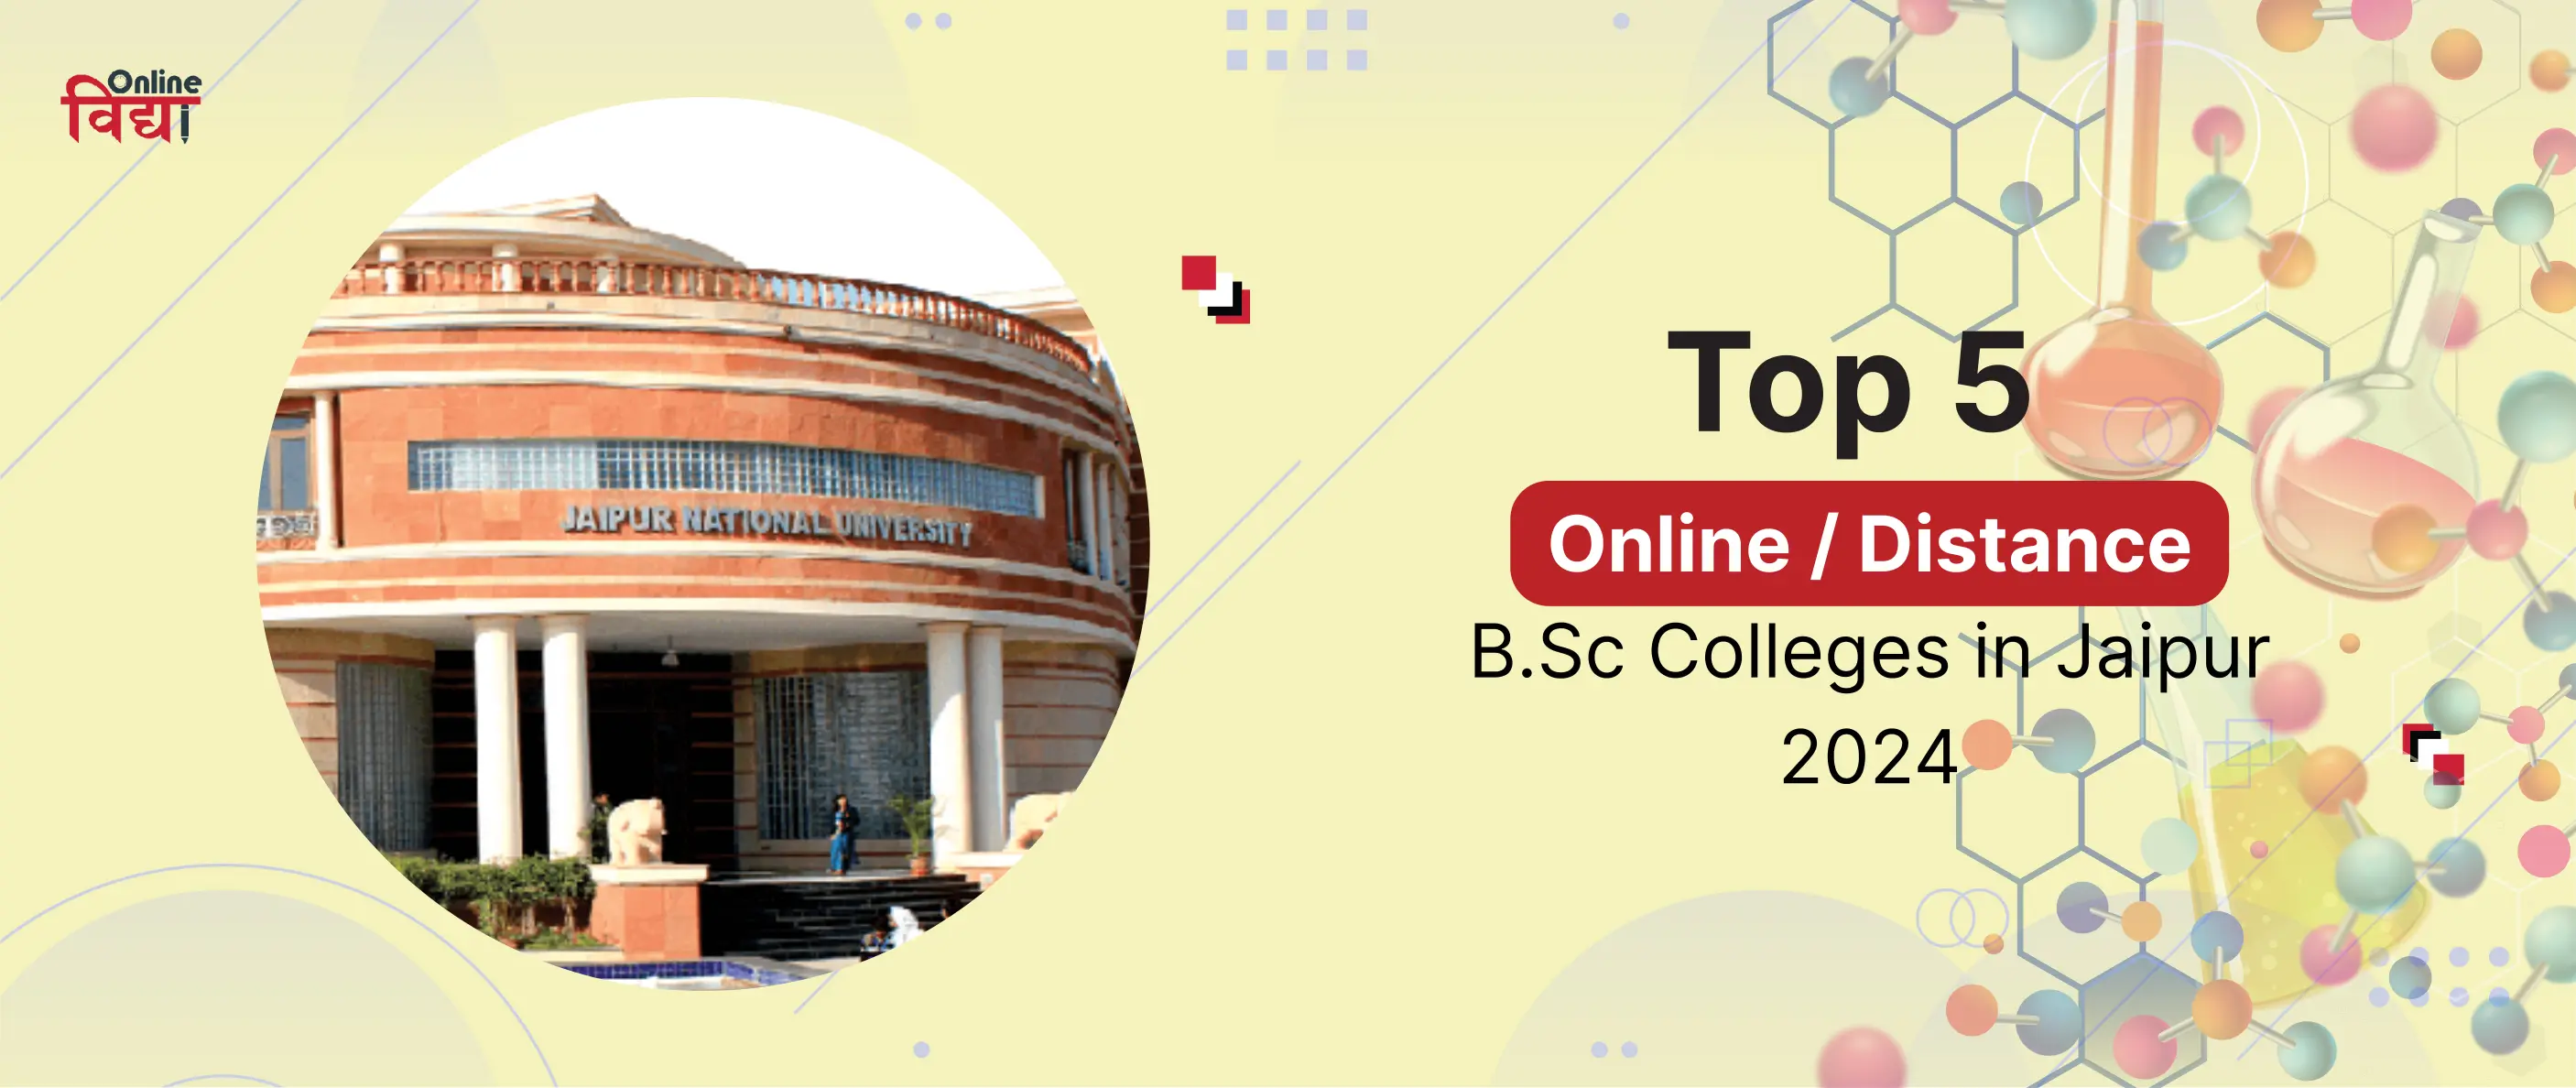 Top 5 Online/ Distance BSc Colleges in Jaipur 2024